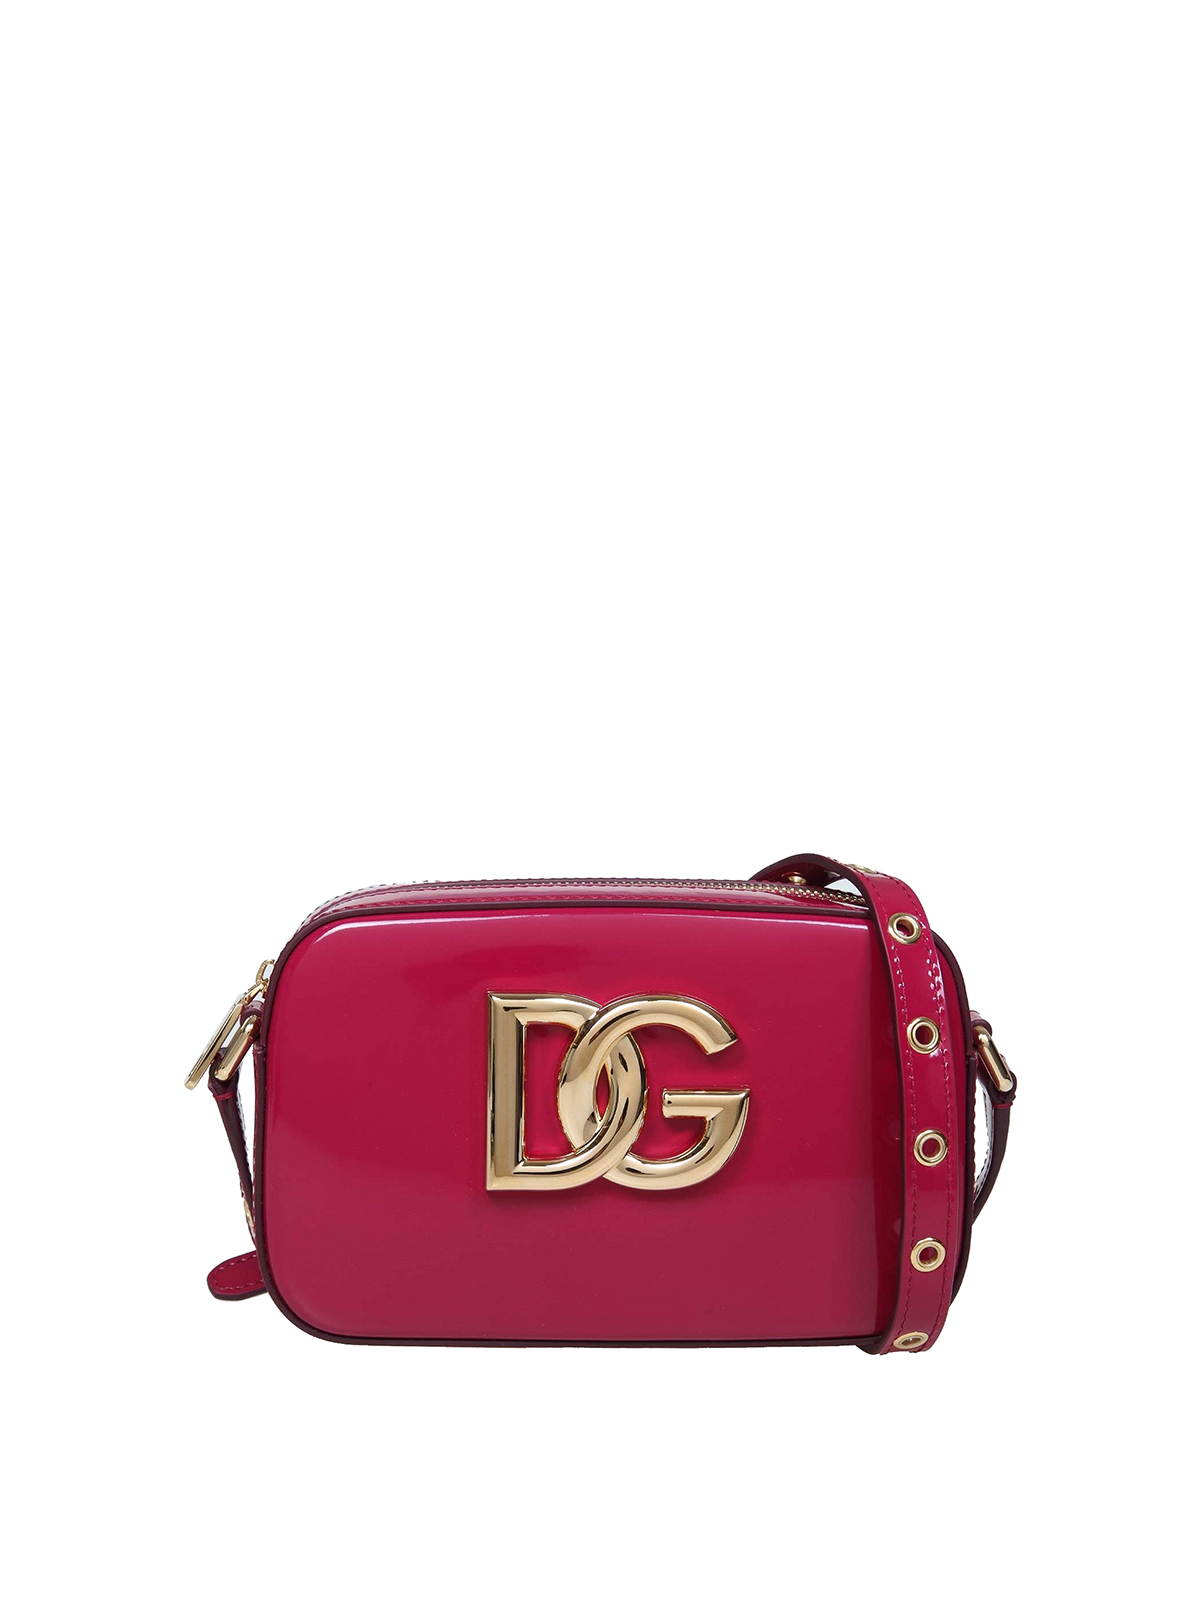 Cross body bags Dolce & Gabbana - Patent leather shoulder bag with